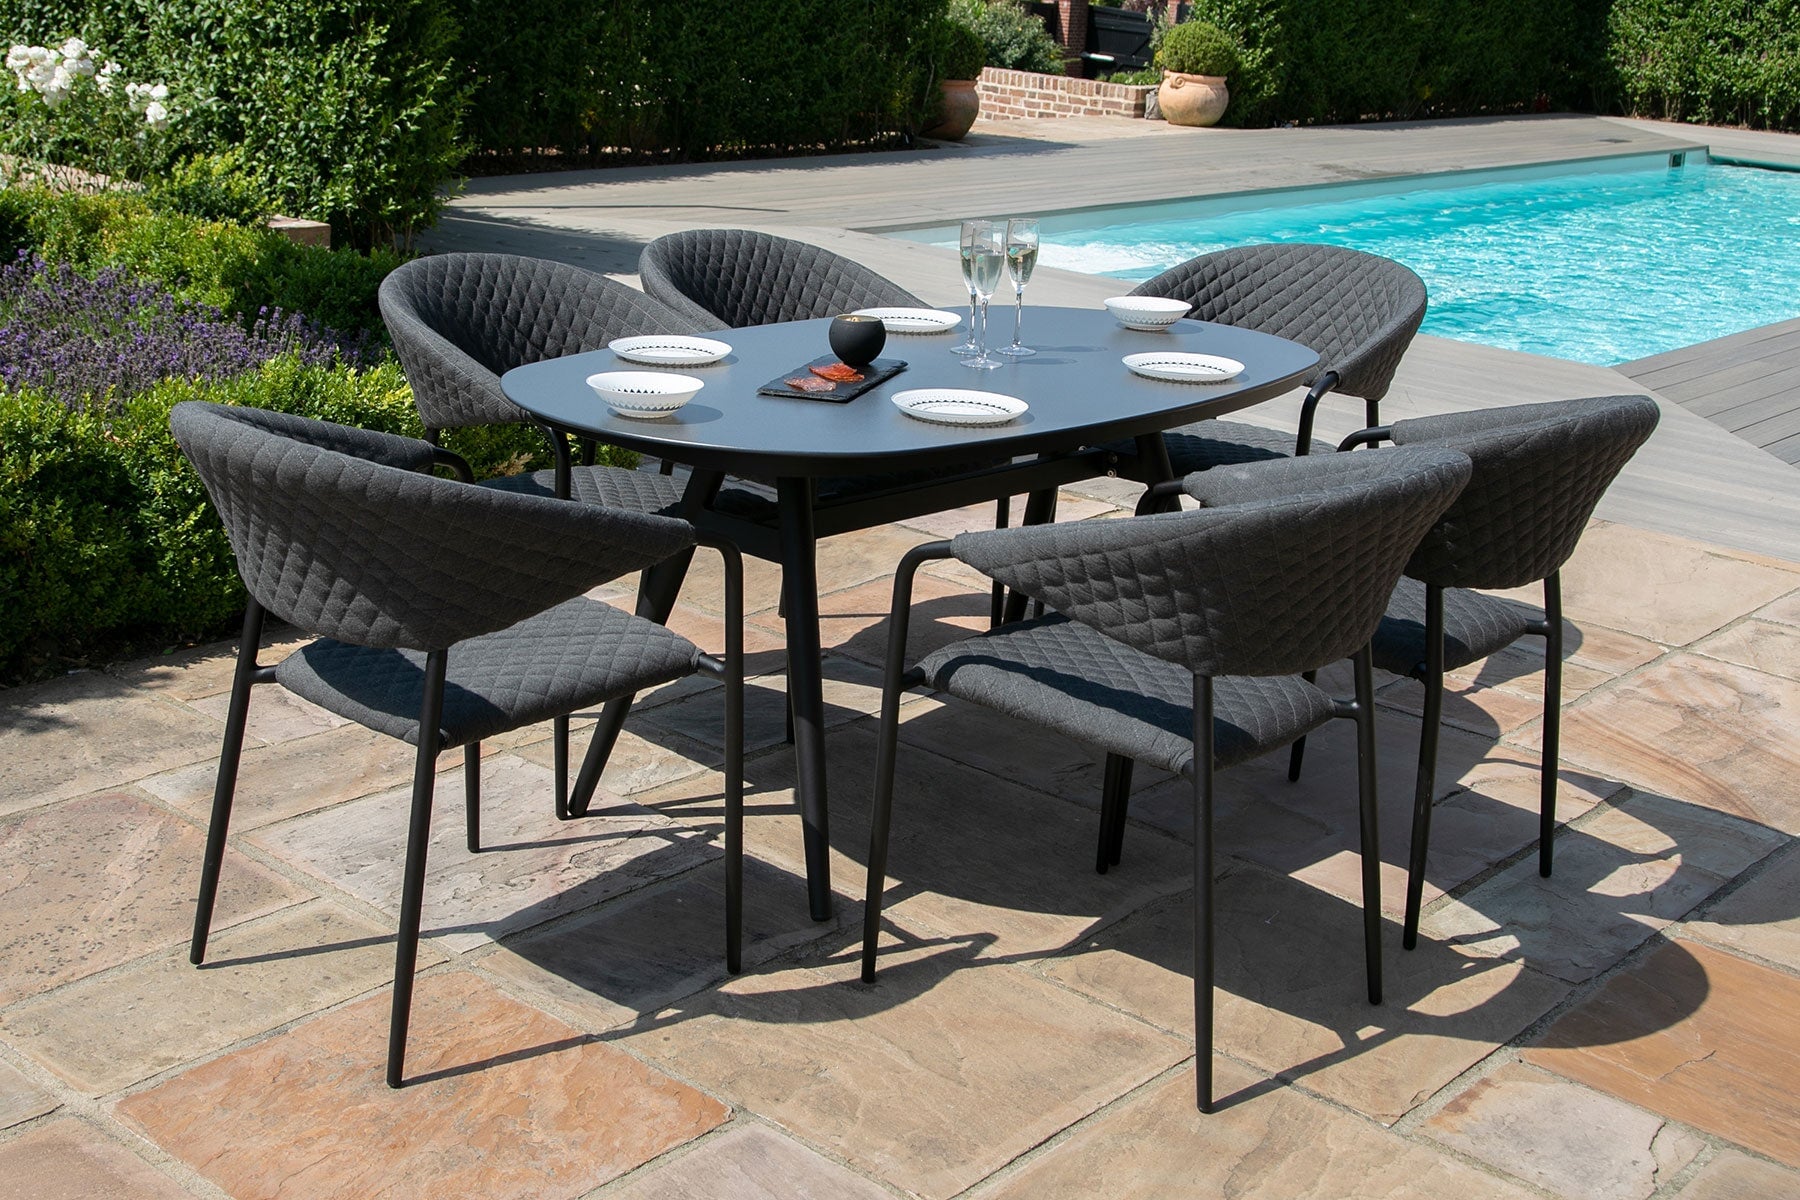 Pebble 6 Seat Oval Dining Set | Charcoal